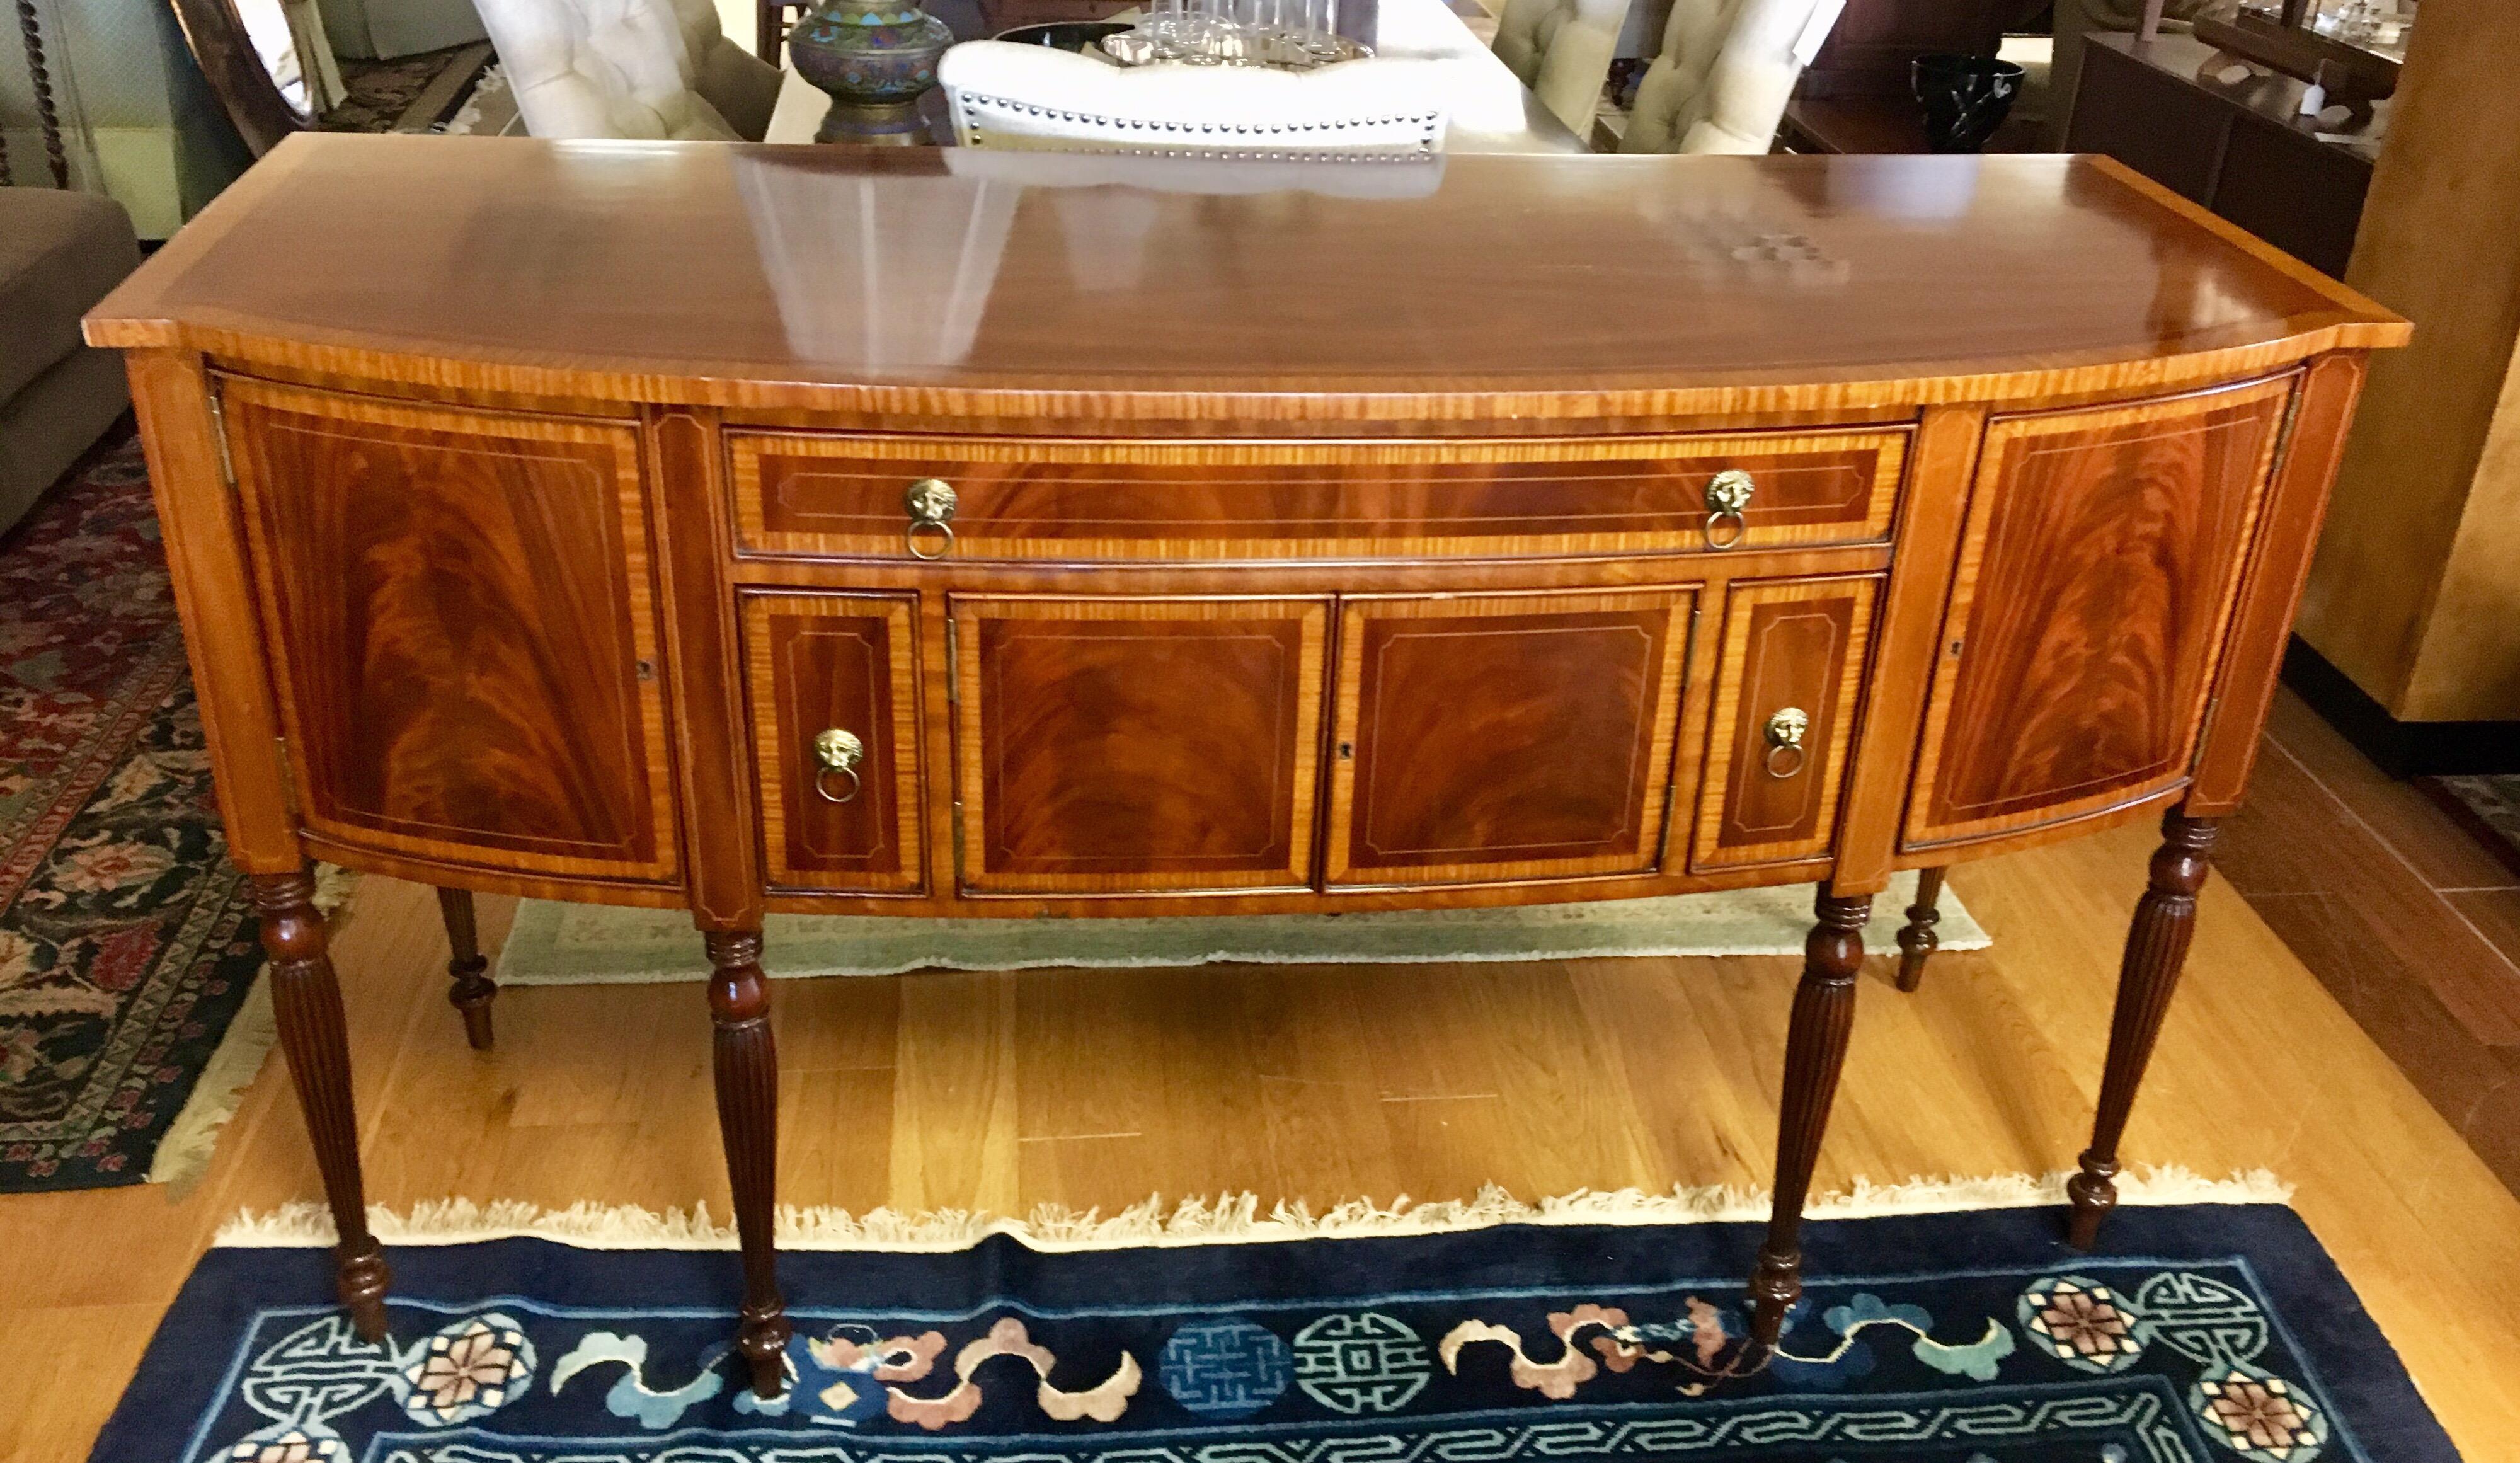 Signed Maitland Smith flame mahogany sideboard/buffet/server with multiple drawers, compartments and brass pulls.
Comes with key to lock drawers. Inlay throughout is gorgeous.